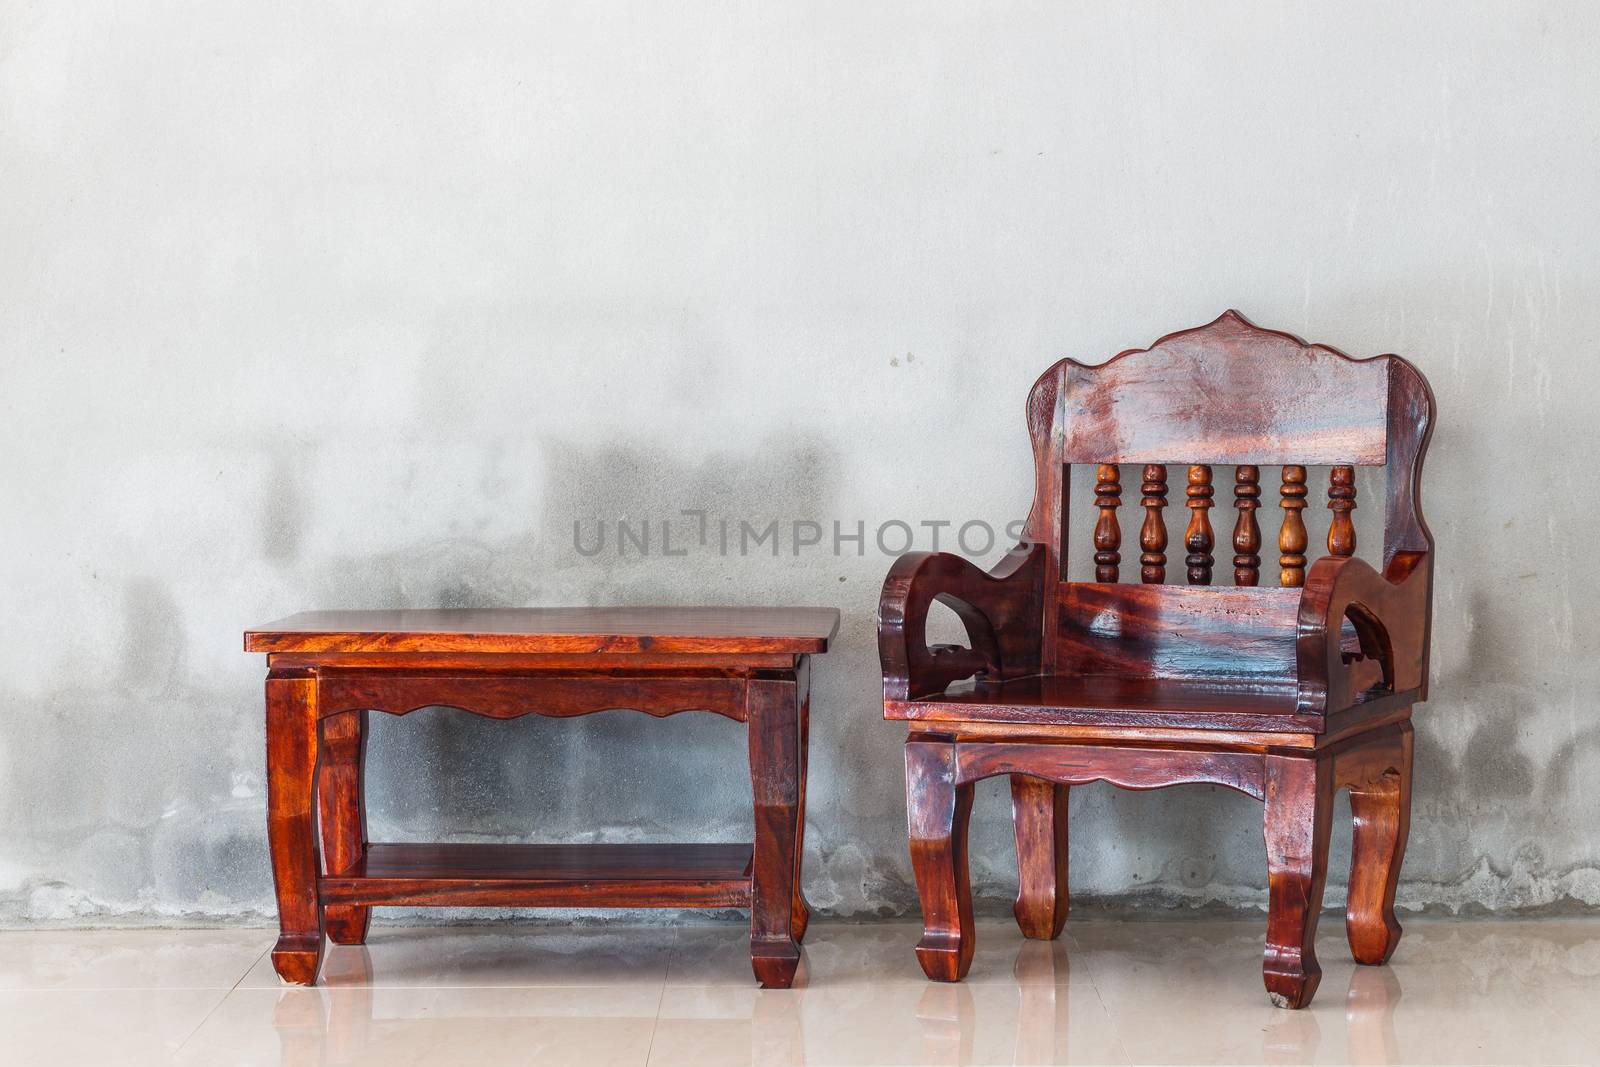 wood chair and table furniture and grunge concrete background